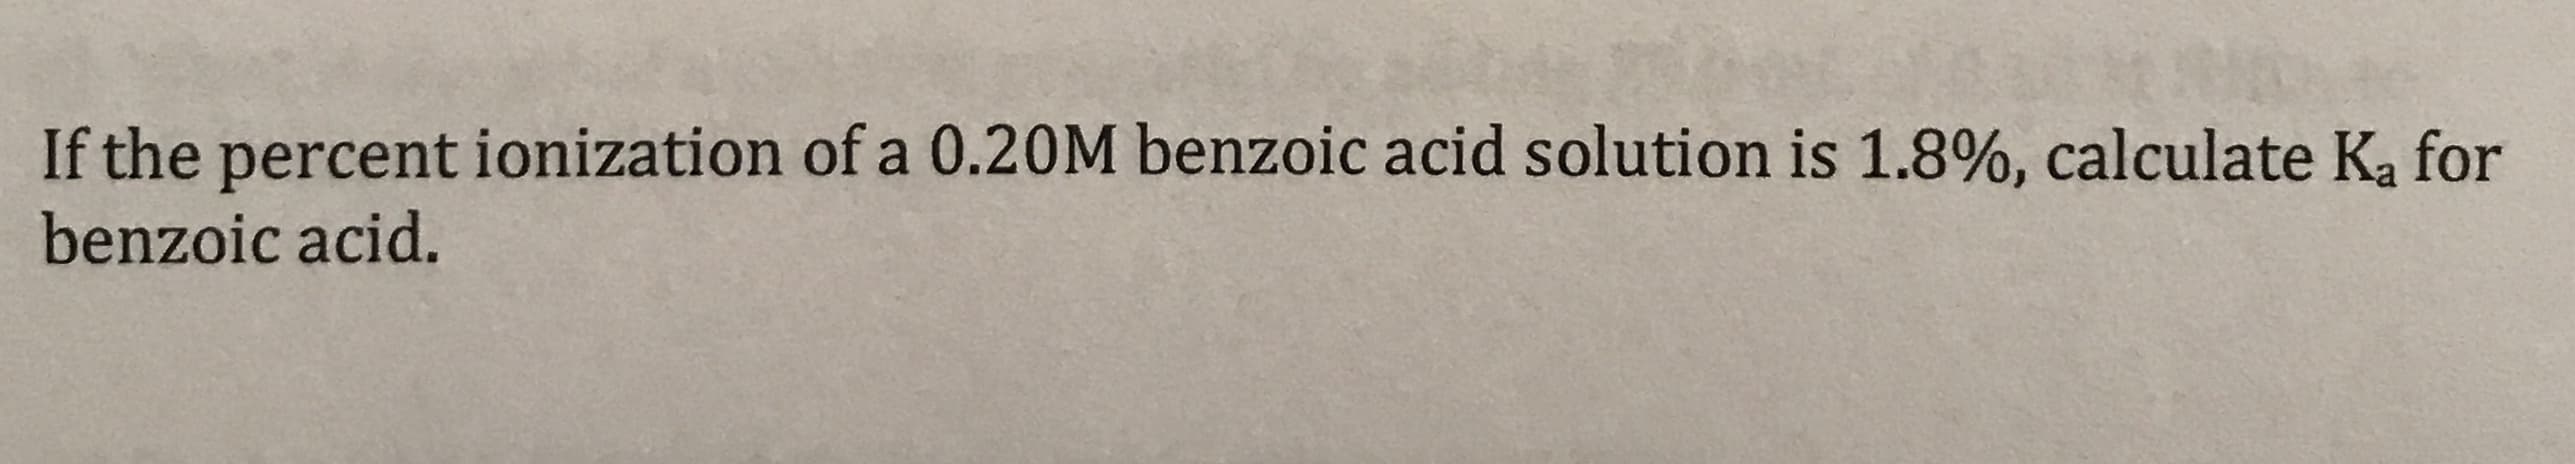 If the percent ionization of a 0.20M benzoic acid solution is 1.8%, calculate Ka for
benzoic acid.
